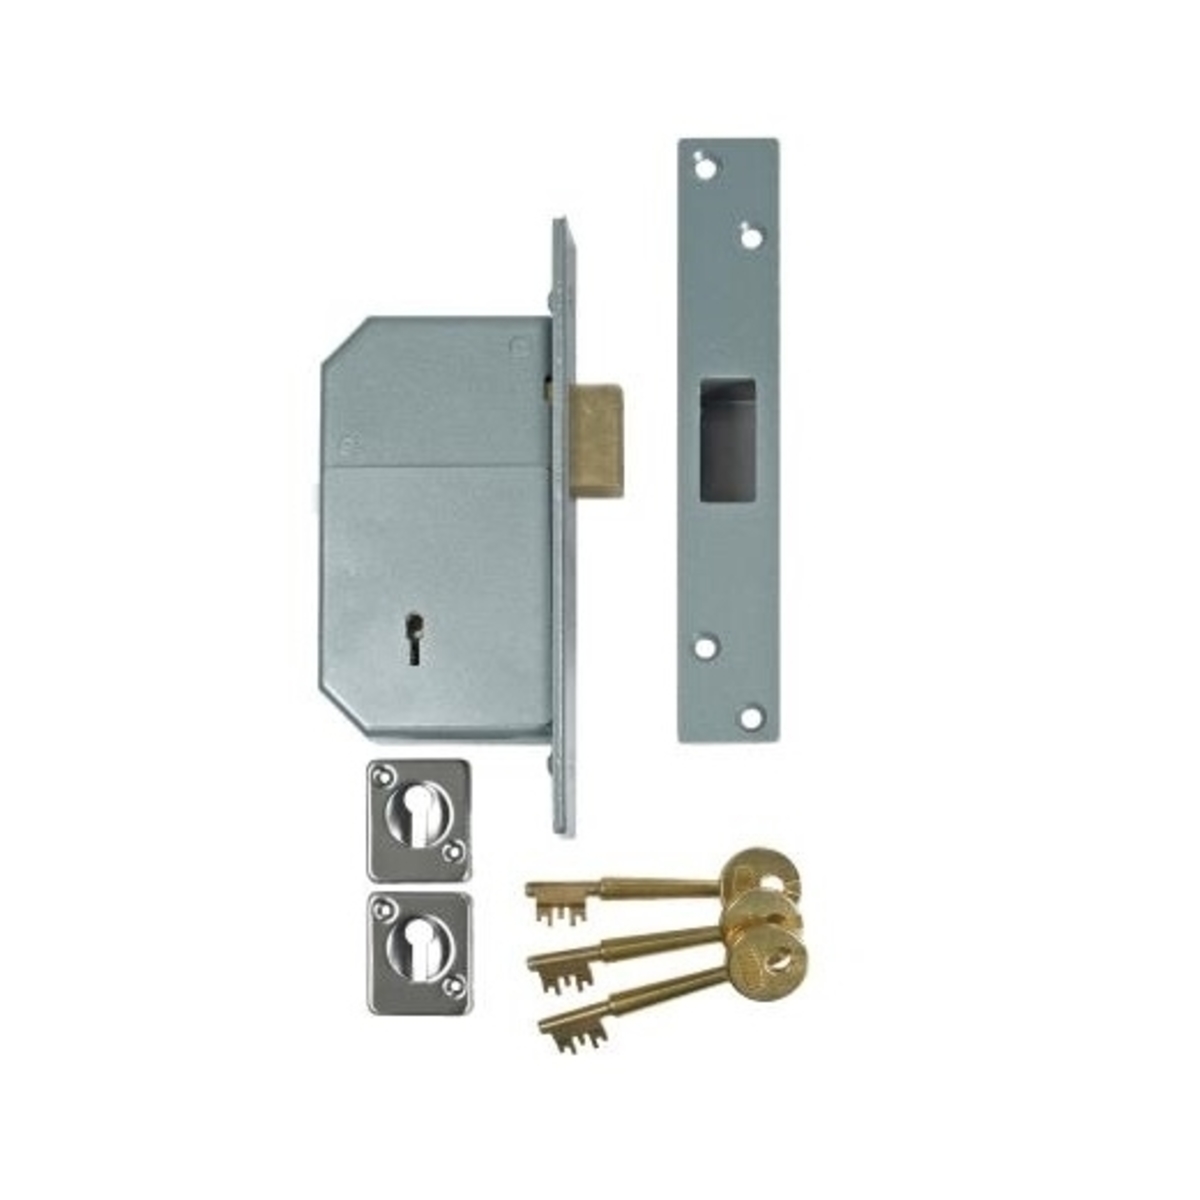 Union 3G 5 Detainer Mortice Deadlock 'Fortress' Suppliers